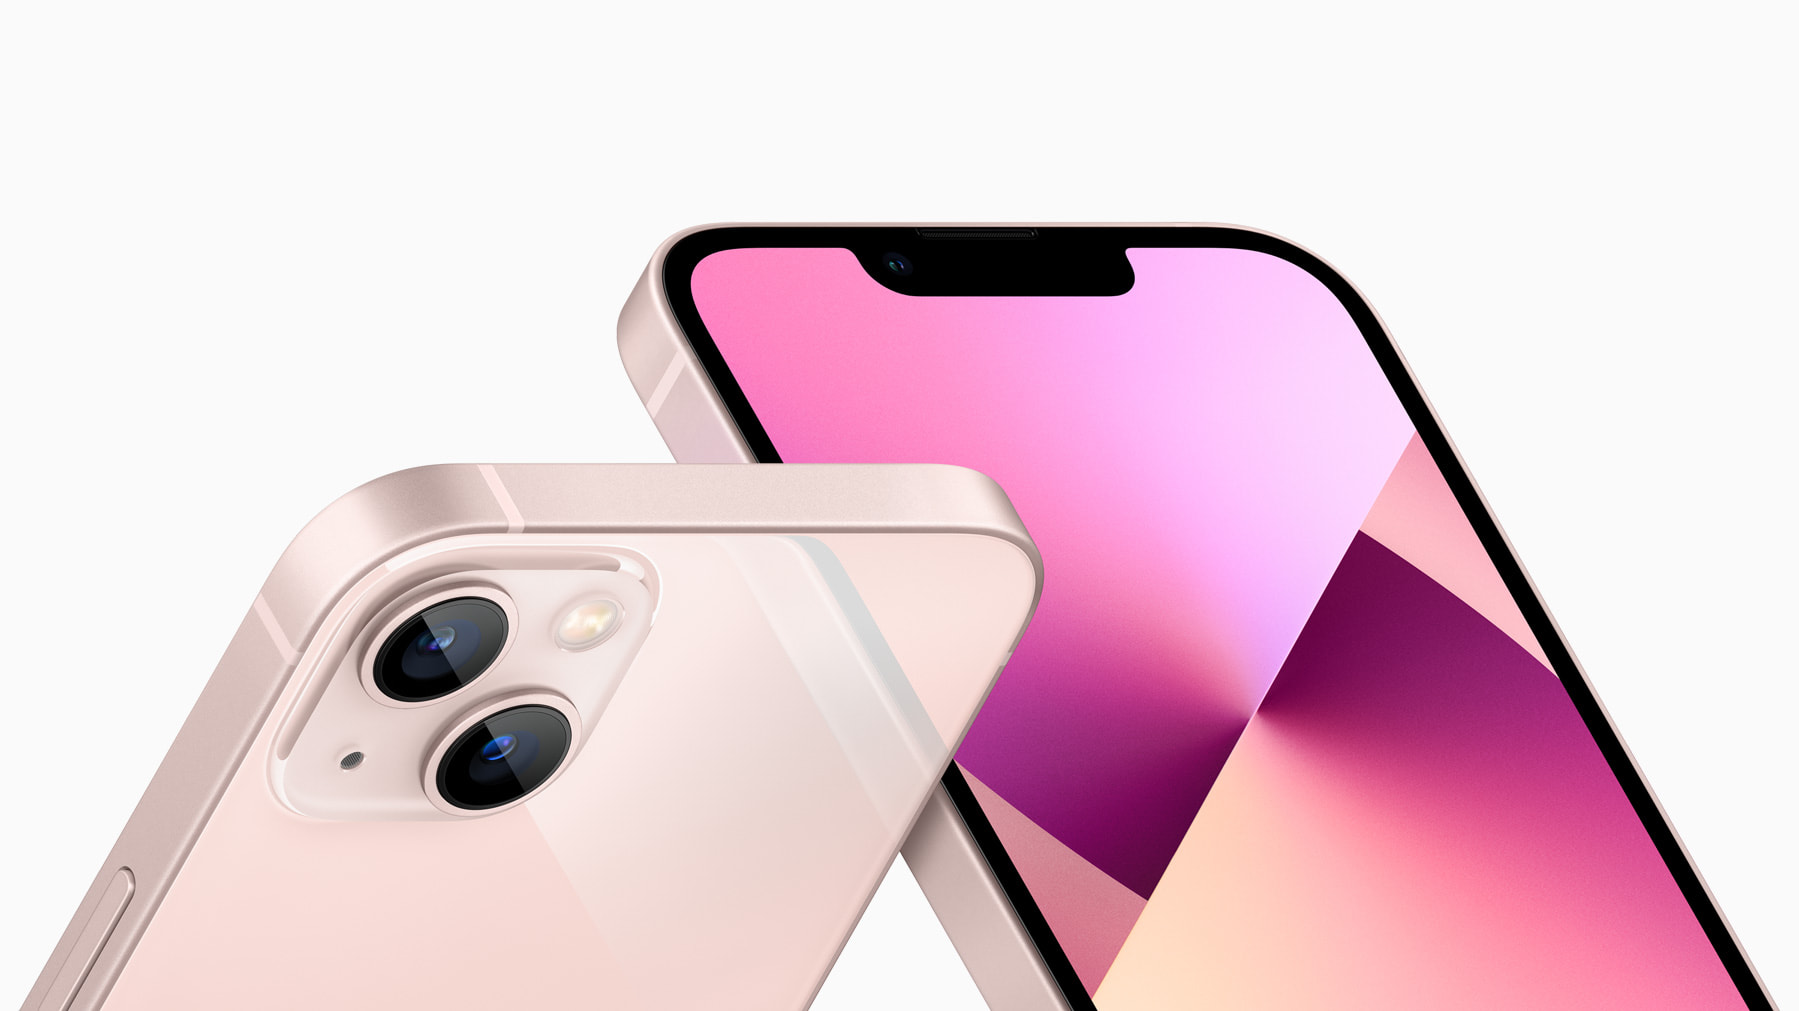 Apple iPhone 13 mini 5G for Sale: Prices, Colors, Sizes & Specs